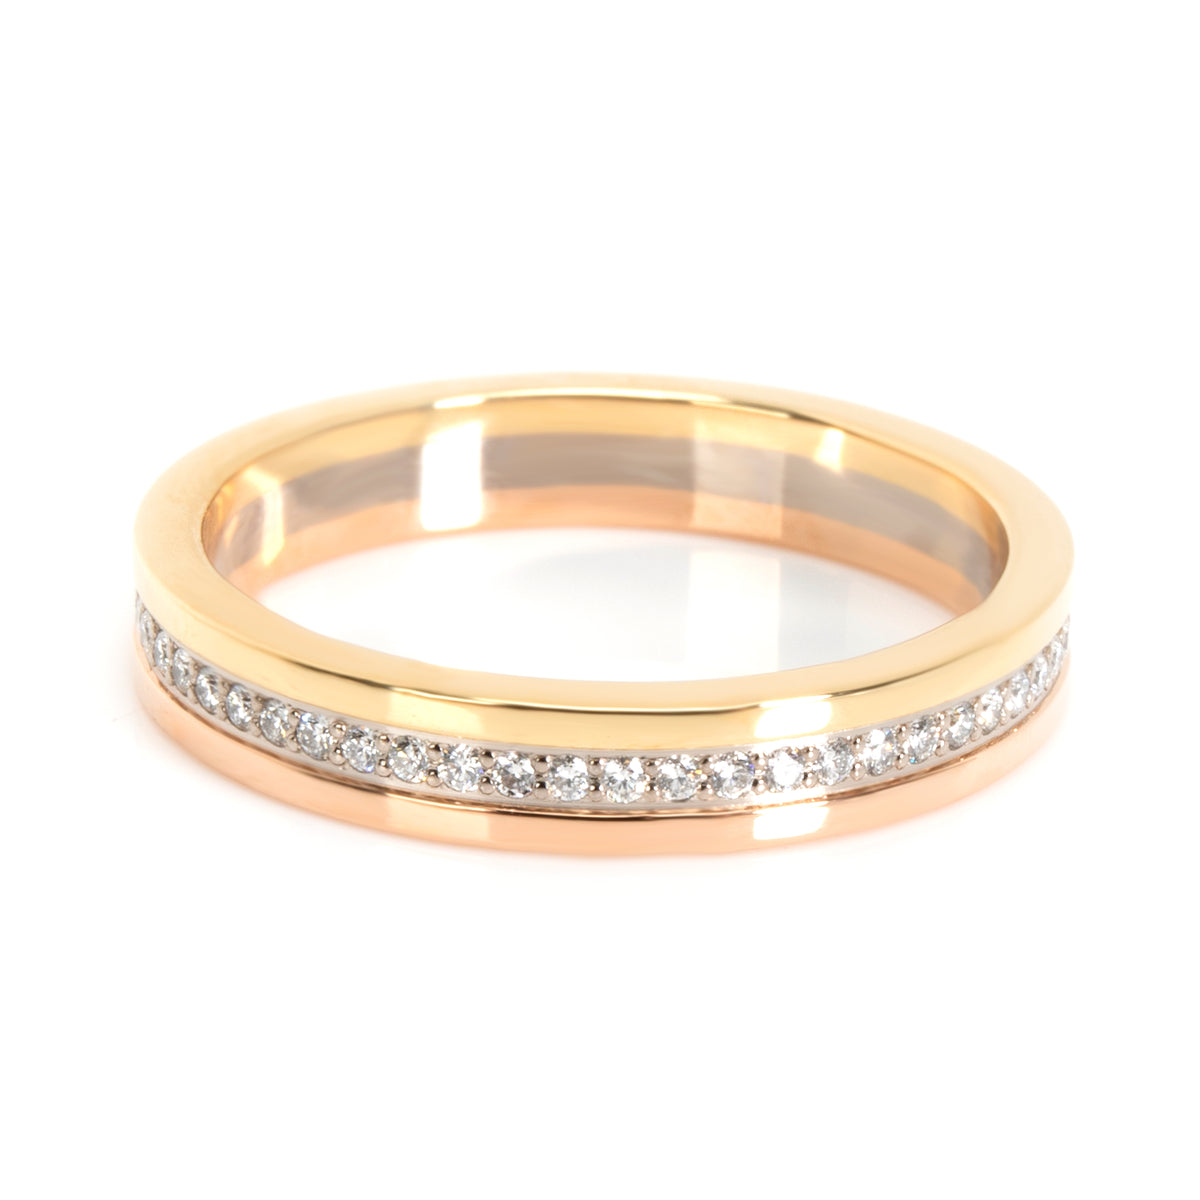 Cartier Trinity Diamond Band in 18K Yellow, Rose & White Gold